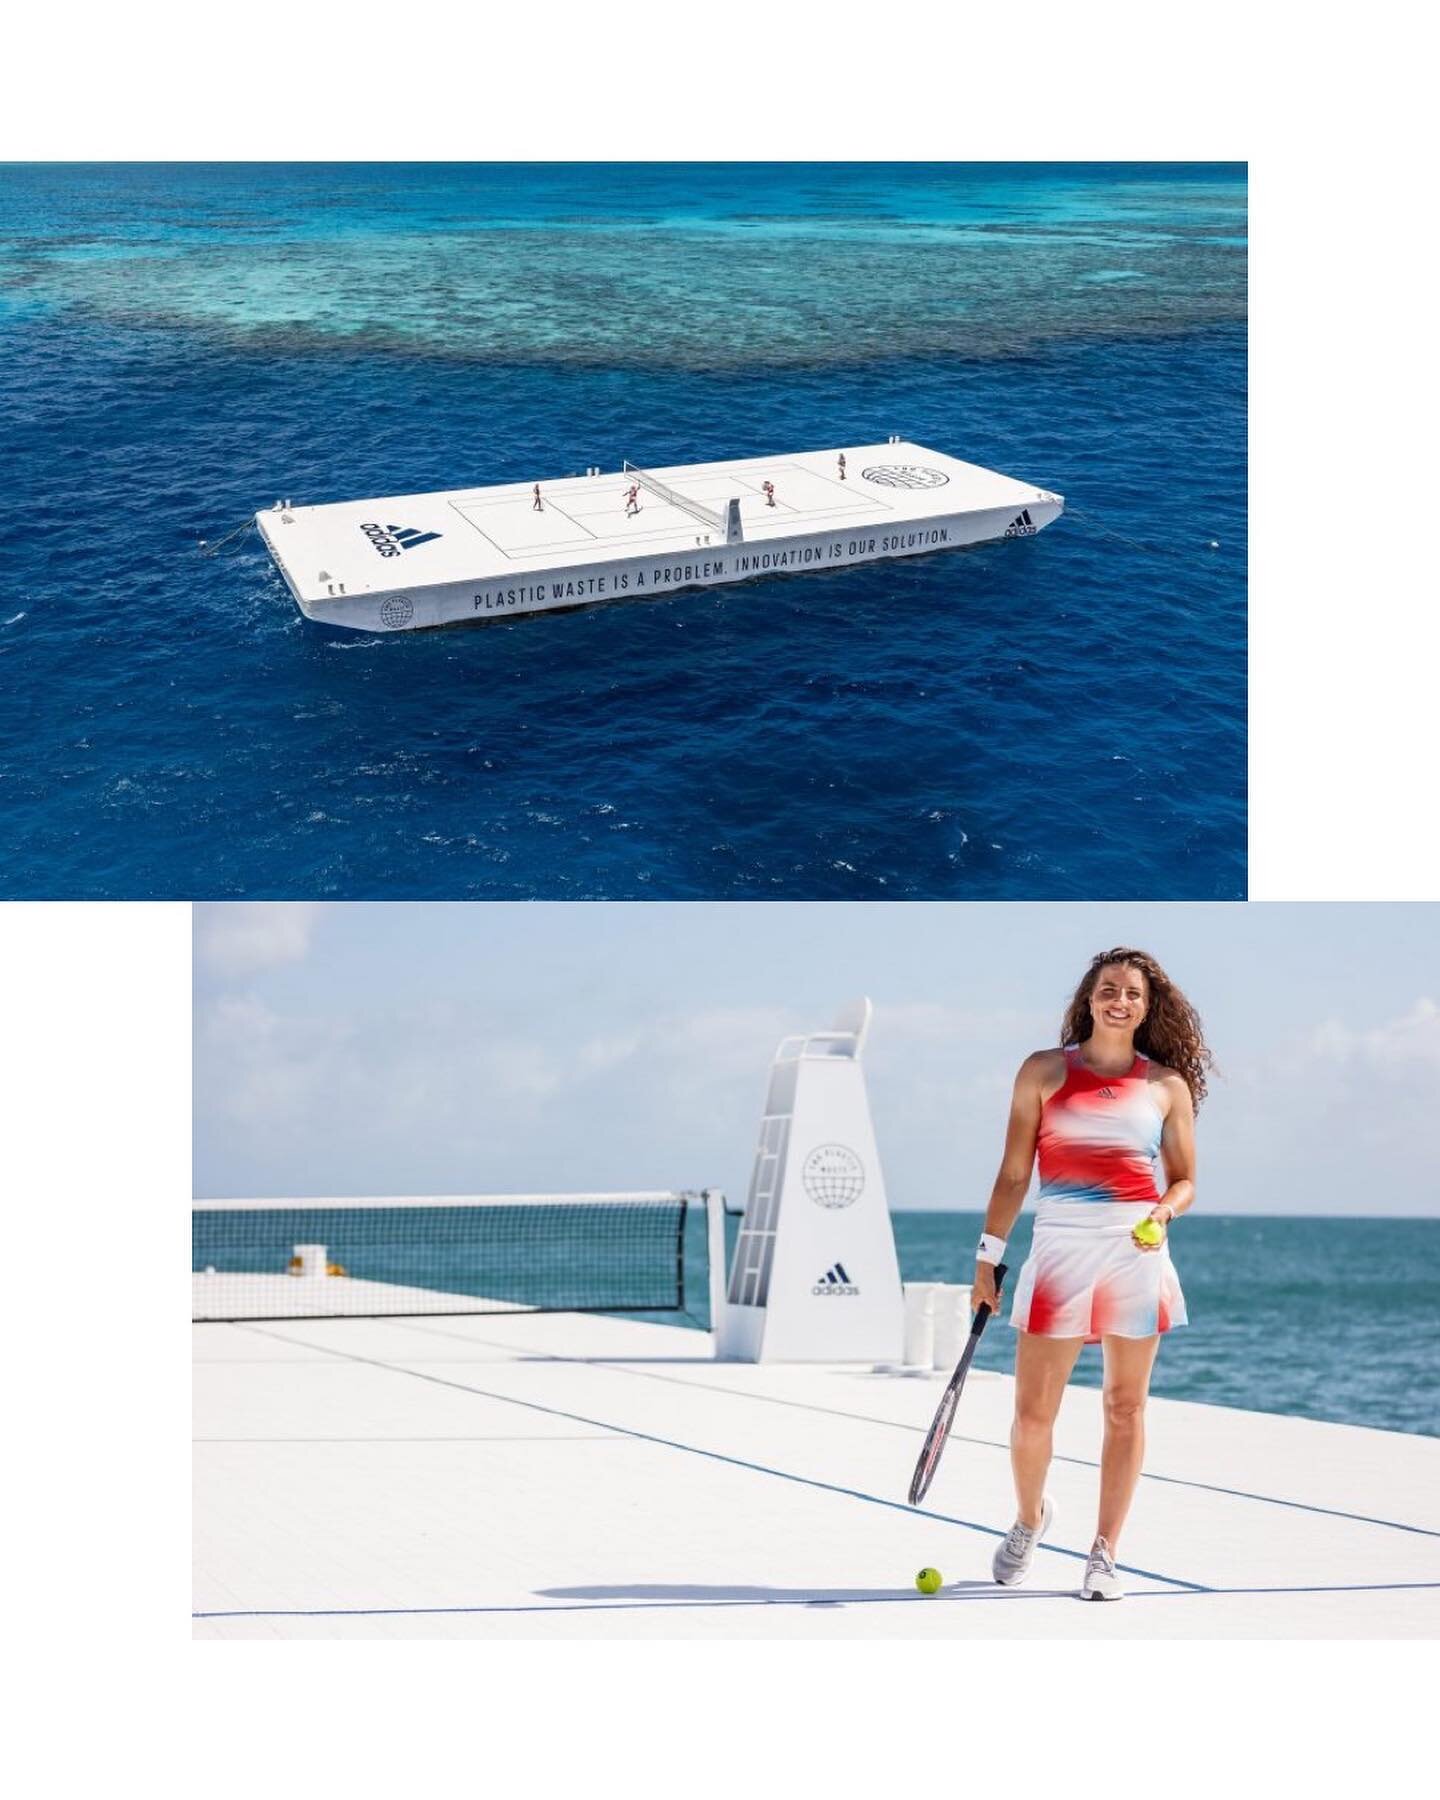 This floating court was created to promote @adidas ' latest range of apparel, which incorporates recycled plastic.

The court's surface was made from #recycled #plastic provided by Parley for the Oceans, which also provides the recycled plastic used 